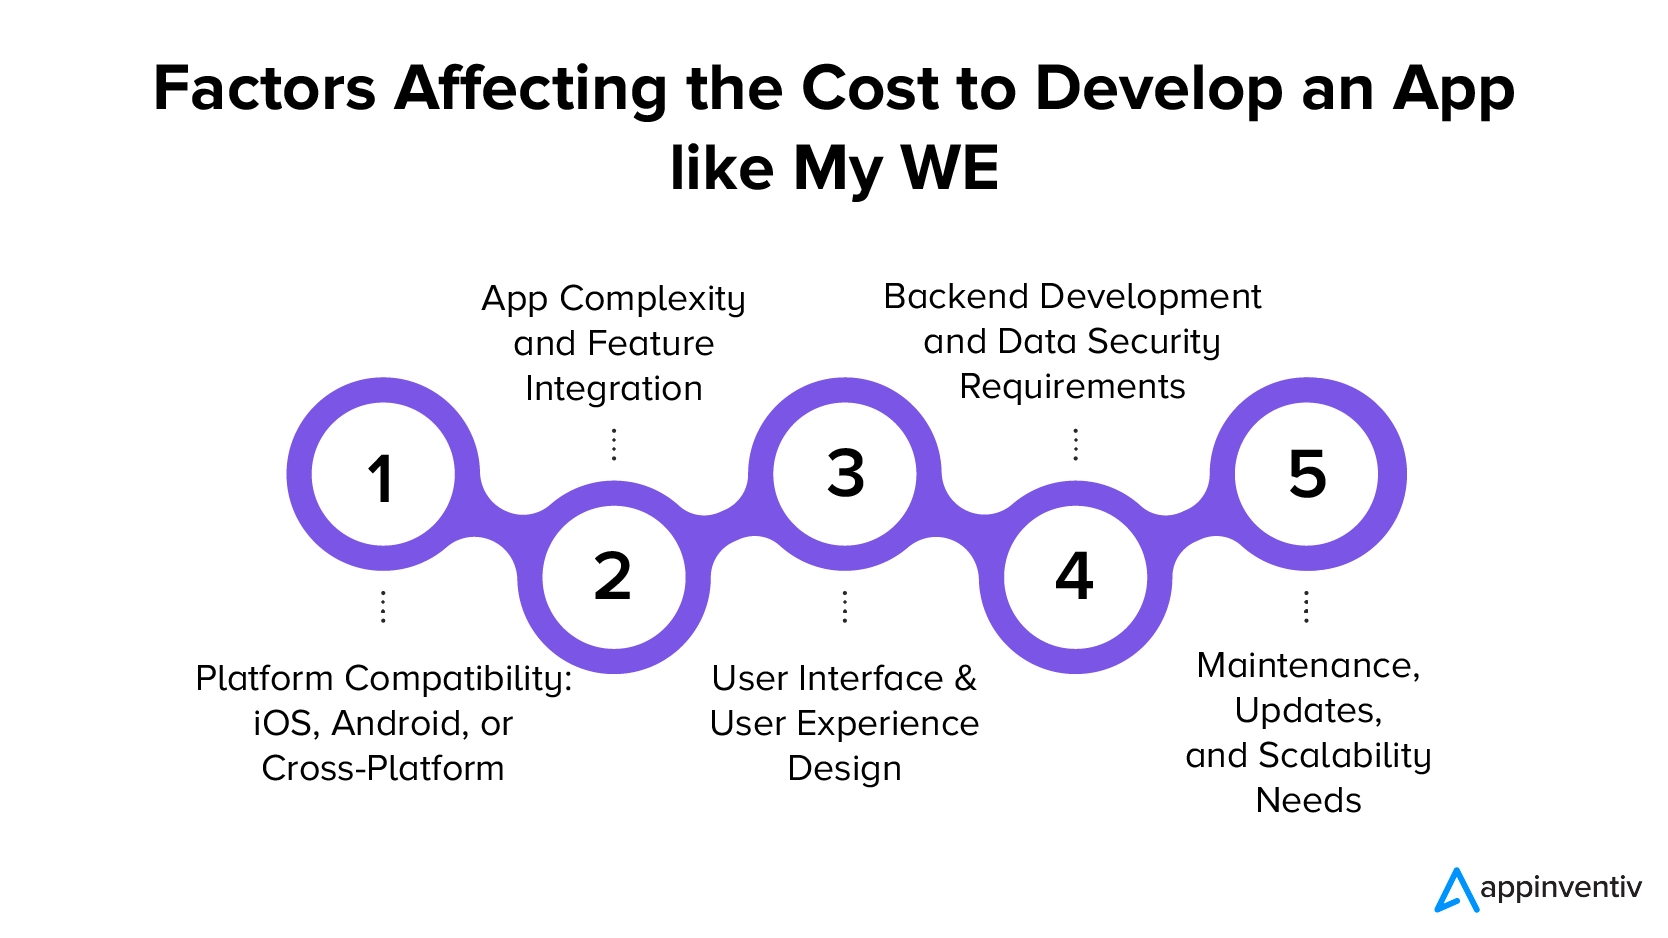 Cost to develop an app like My WE